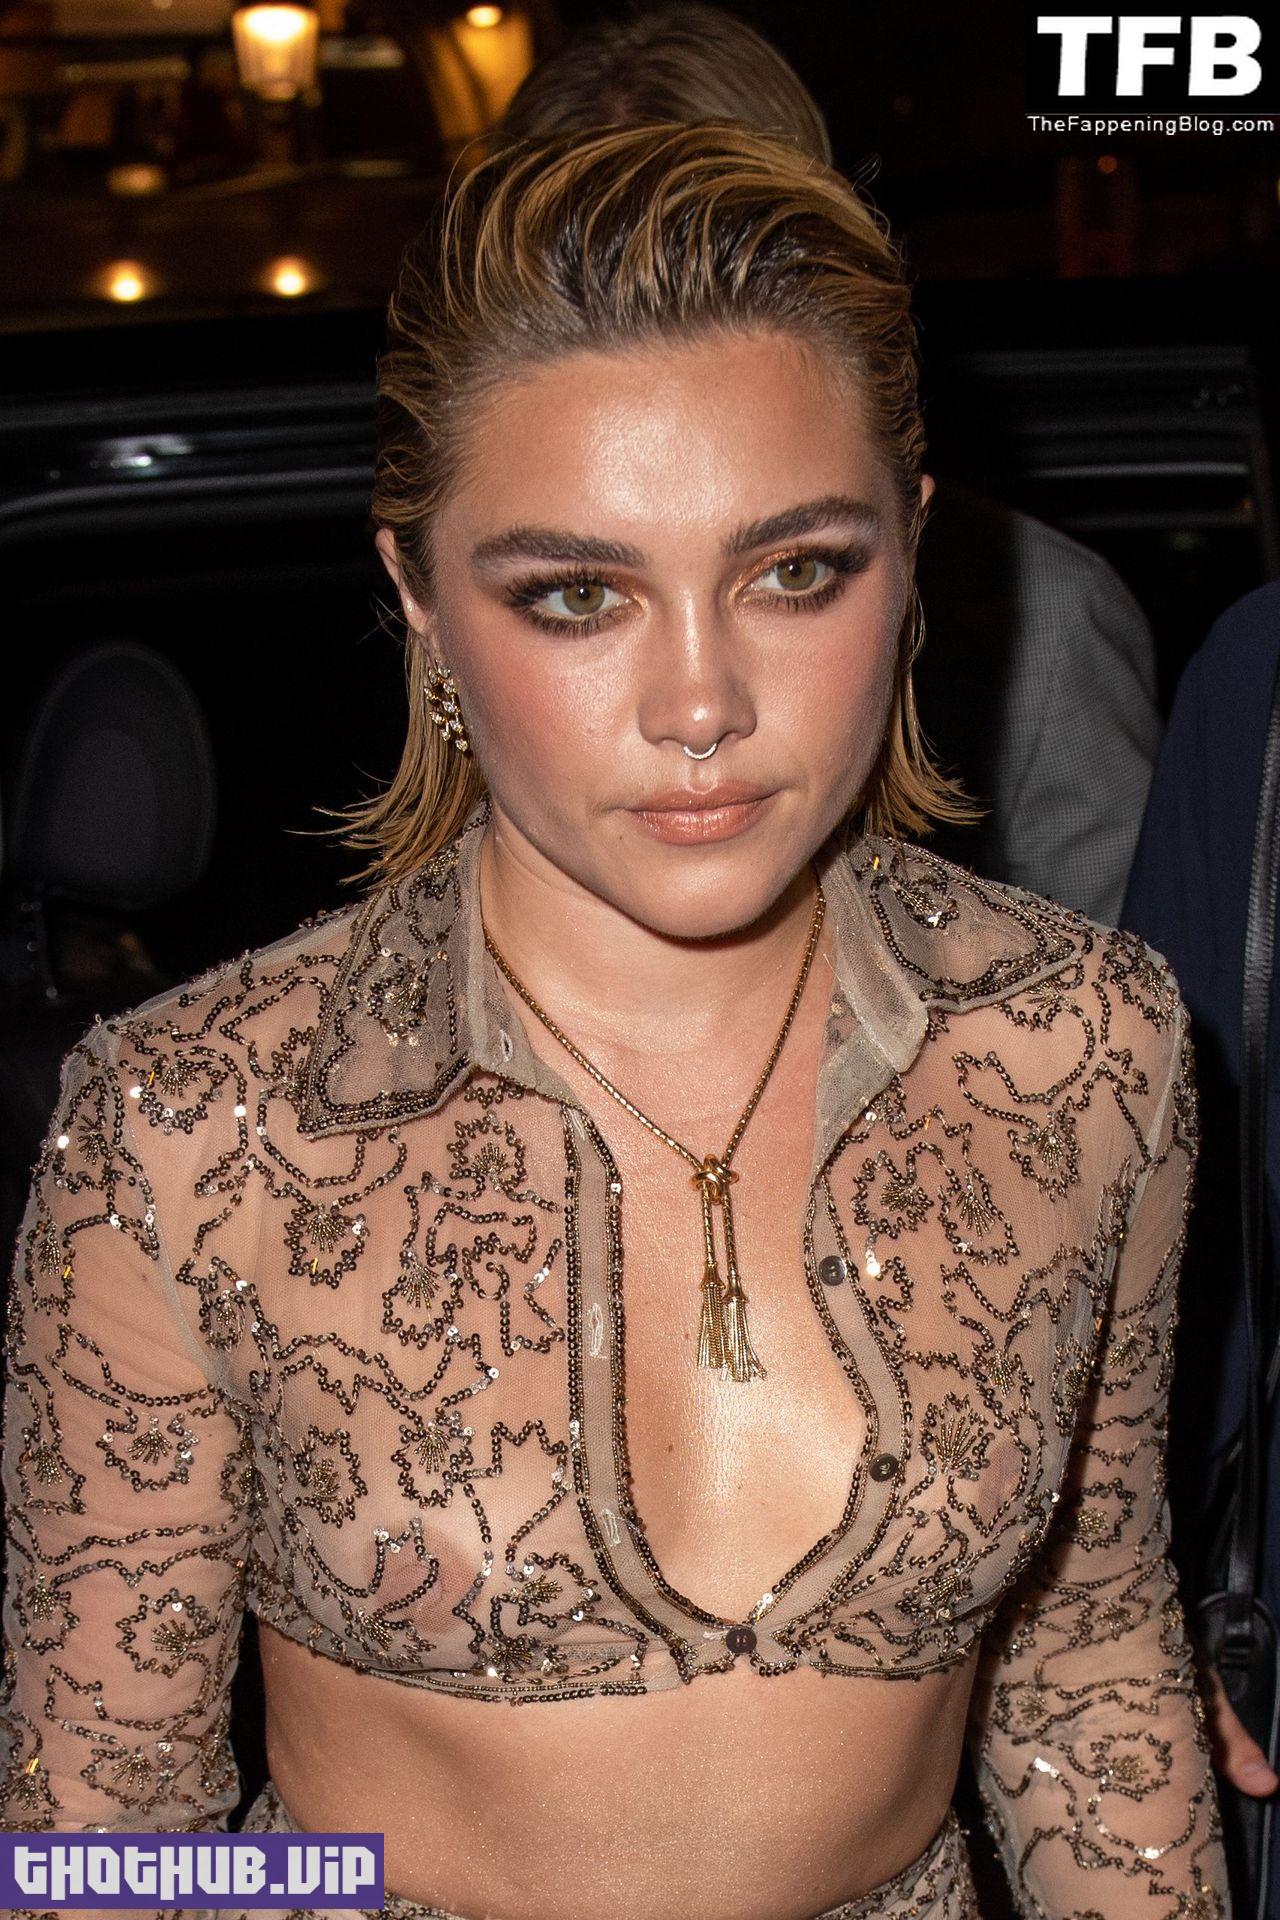 Florence Pugh See Through Nudity The Fappening Blog 10